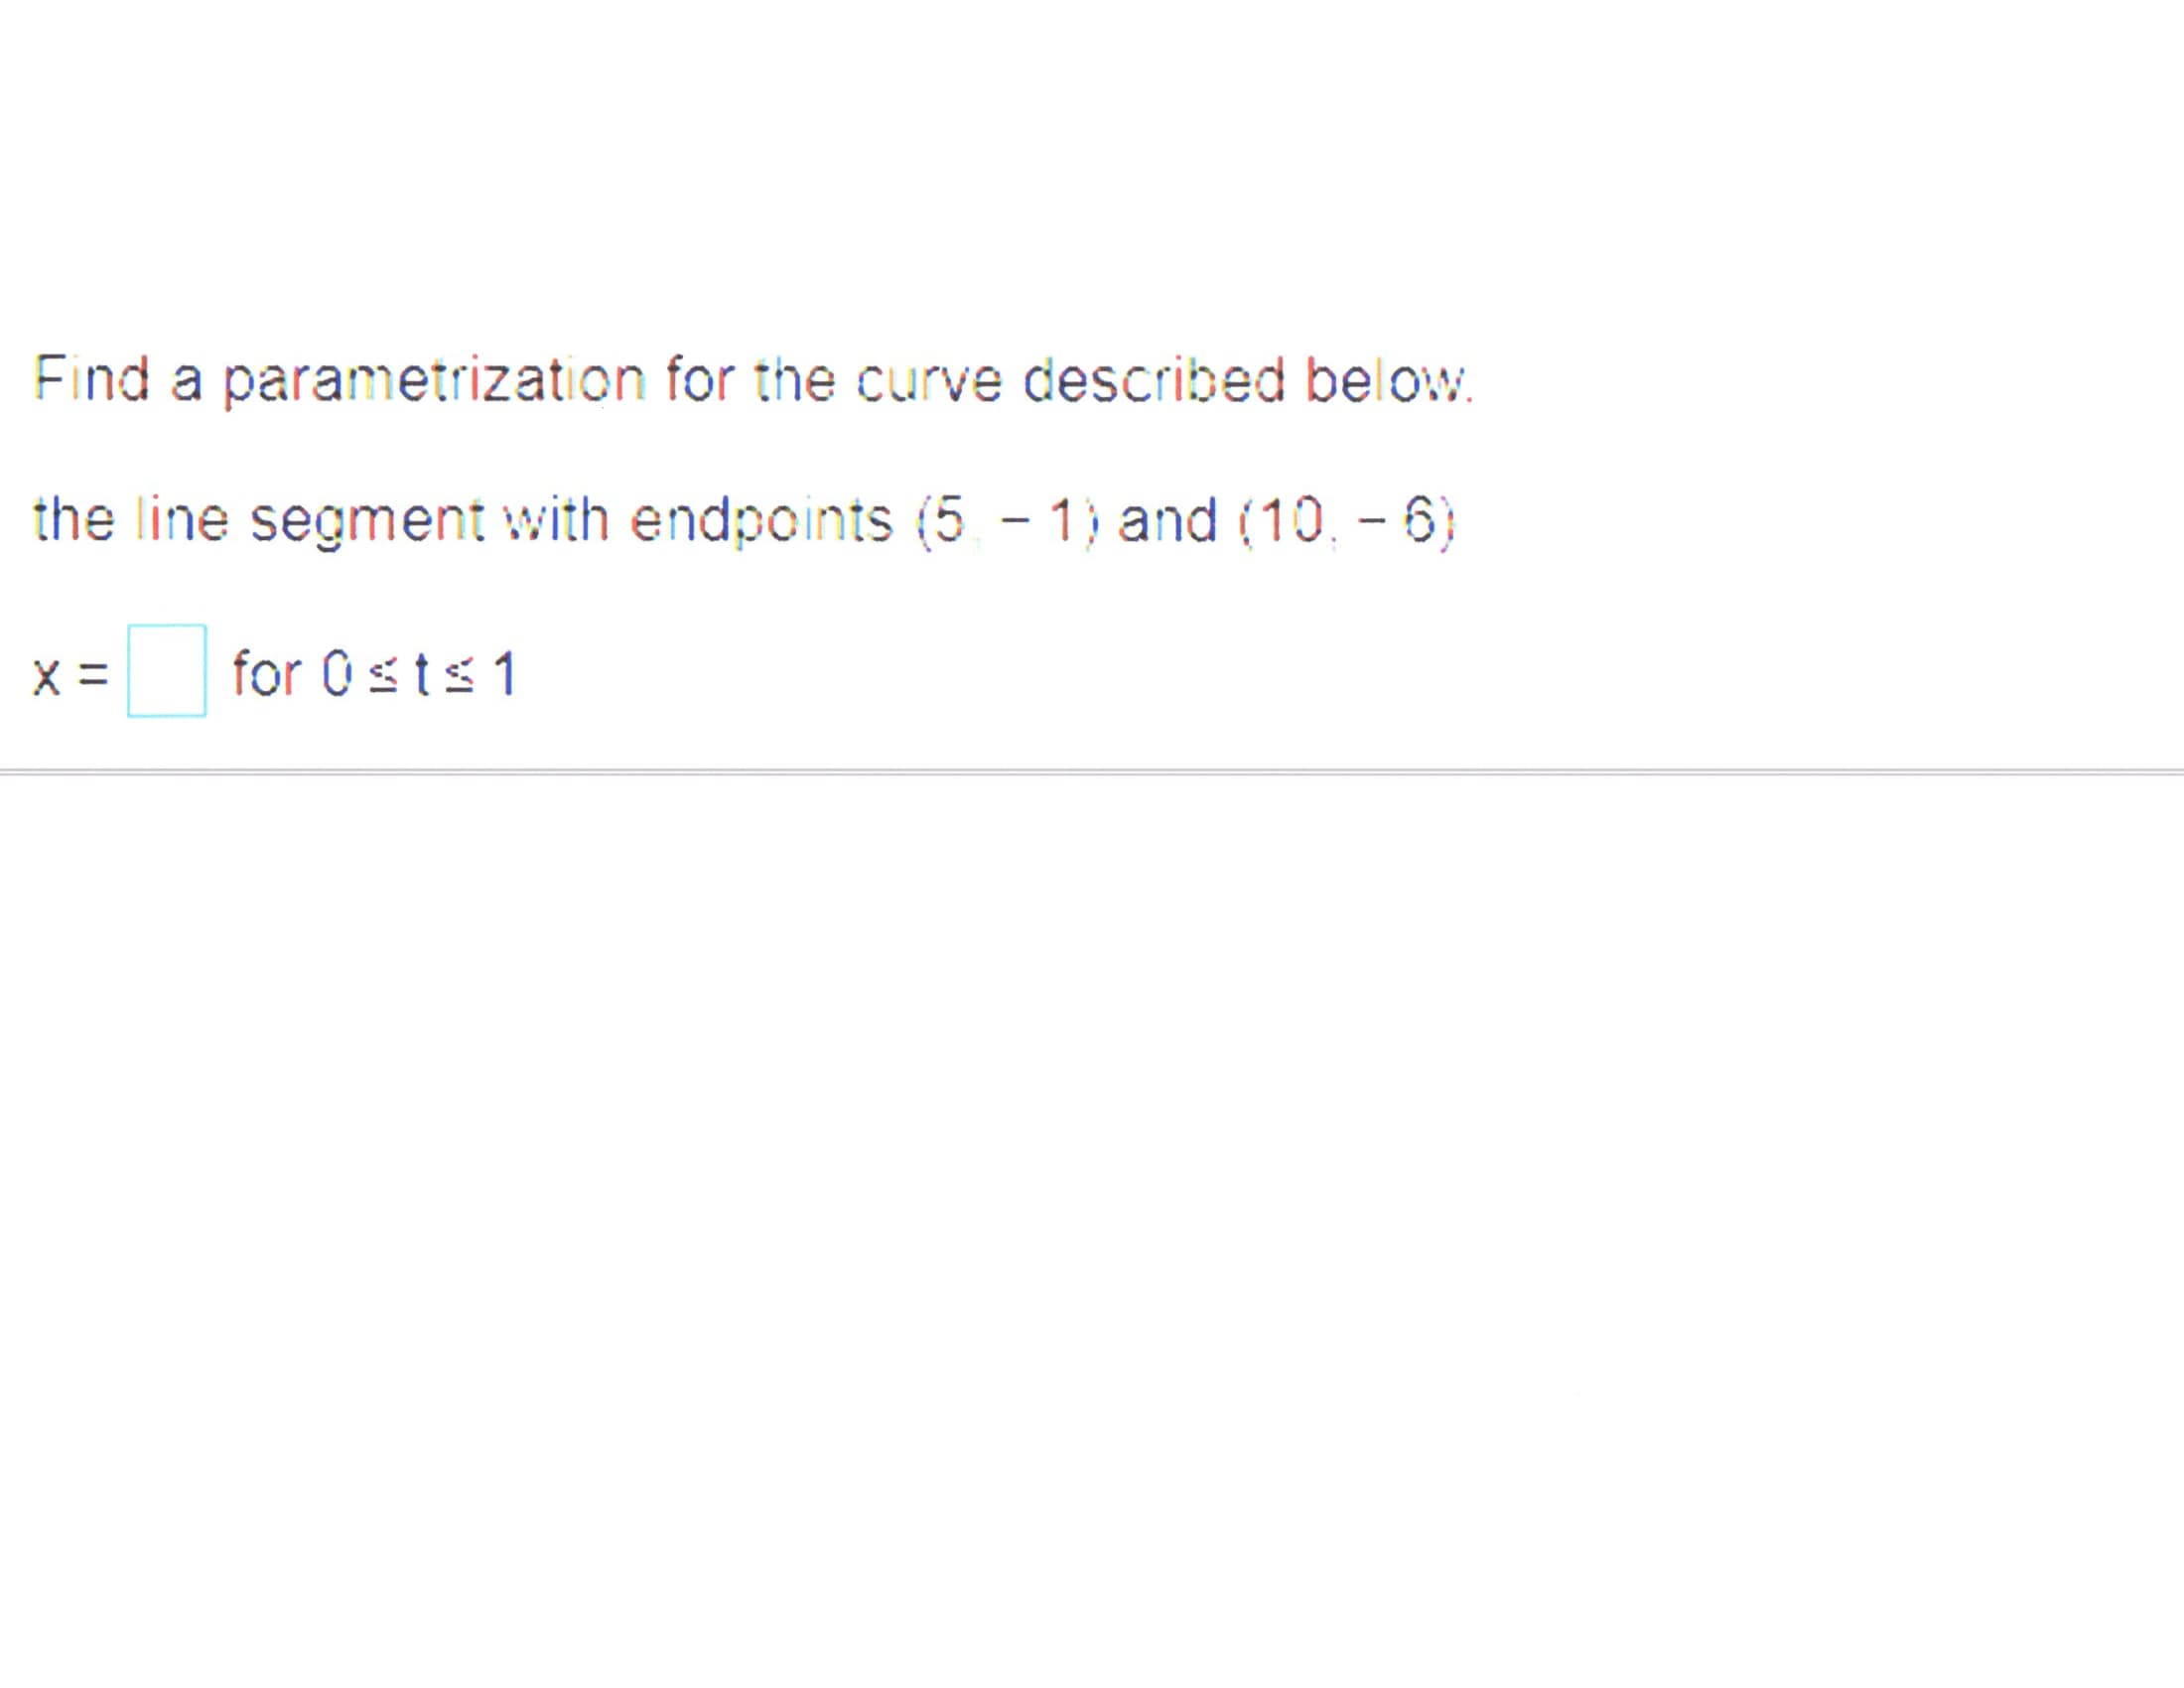 Find a parametrization for the curve described below.
the line segment with endpoints (5 - 1) and (10. - 6)
X =
for 0sts1
